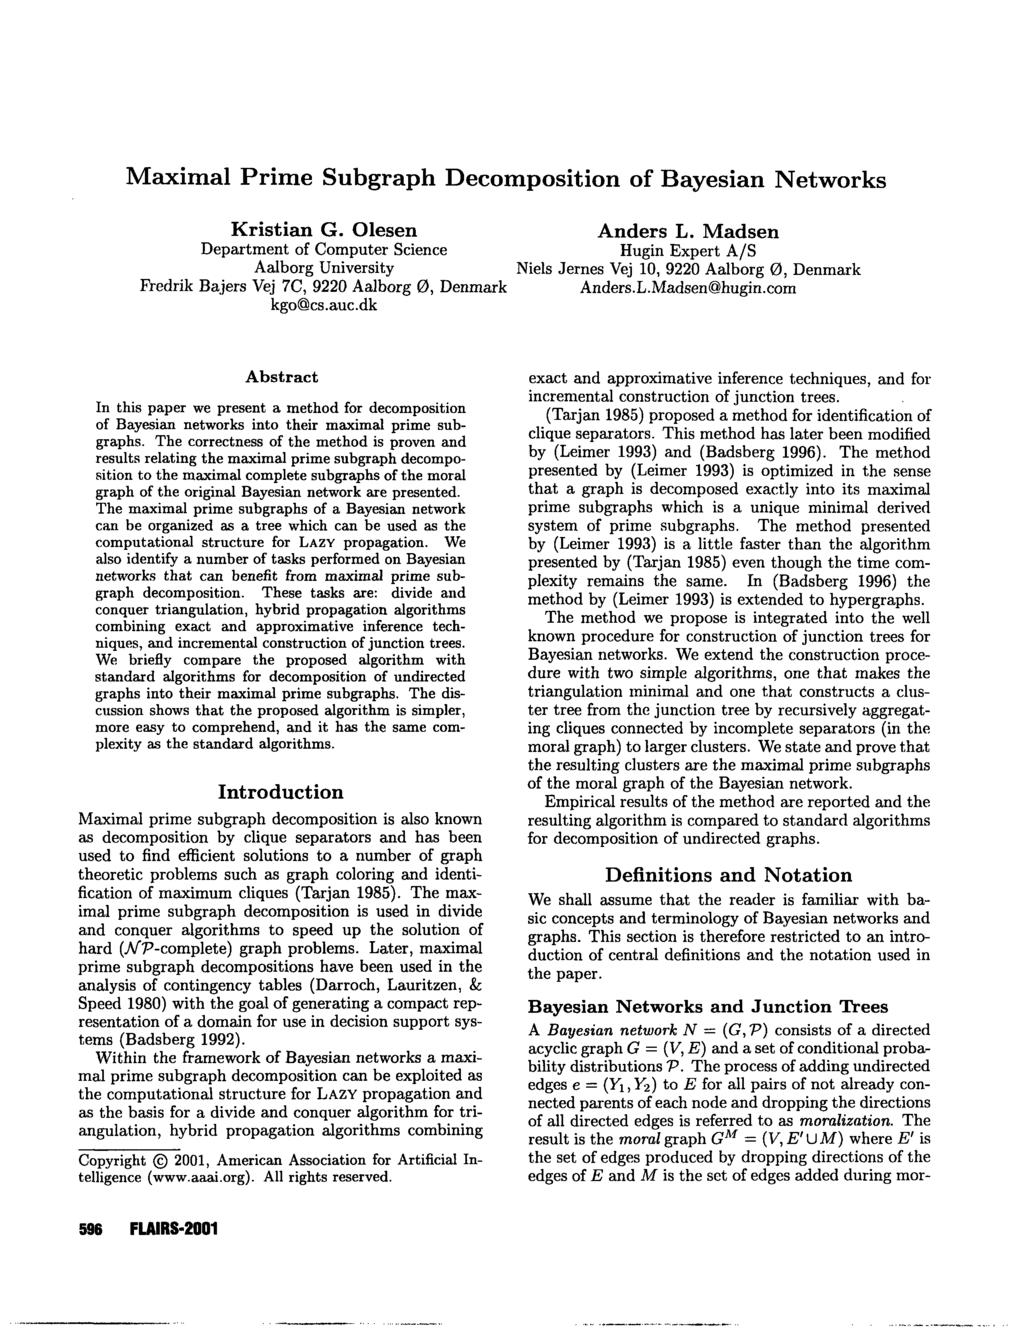 From: FLAIRS-01 Proceedings. Copyright 2001, AAAI (www.aaai.org). All rights reserved. Maximal Prime Subgraph Decomposition of Bayesian Networks Kristian G. Olesen Anders L.